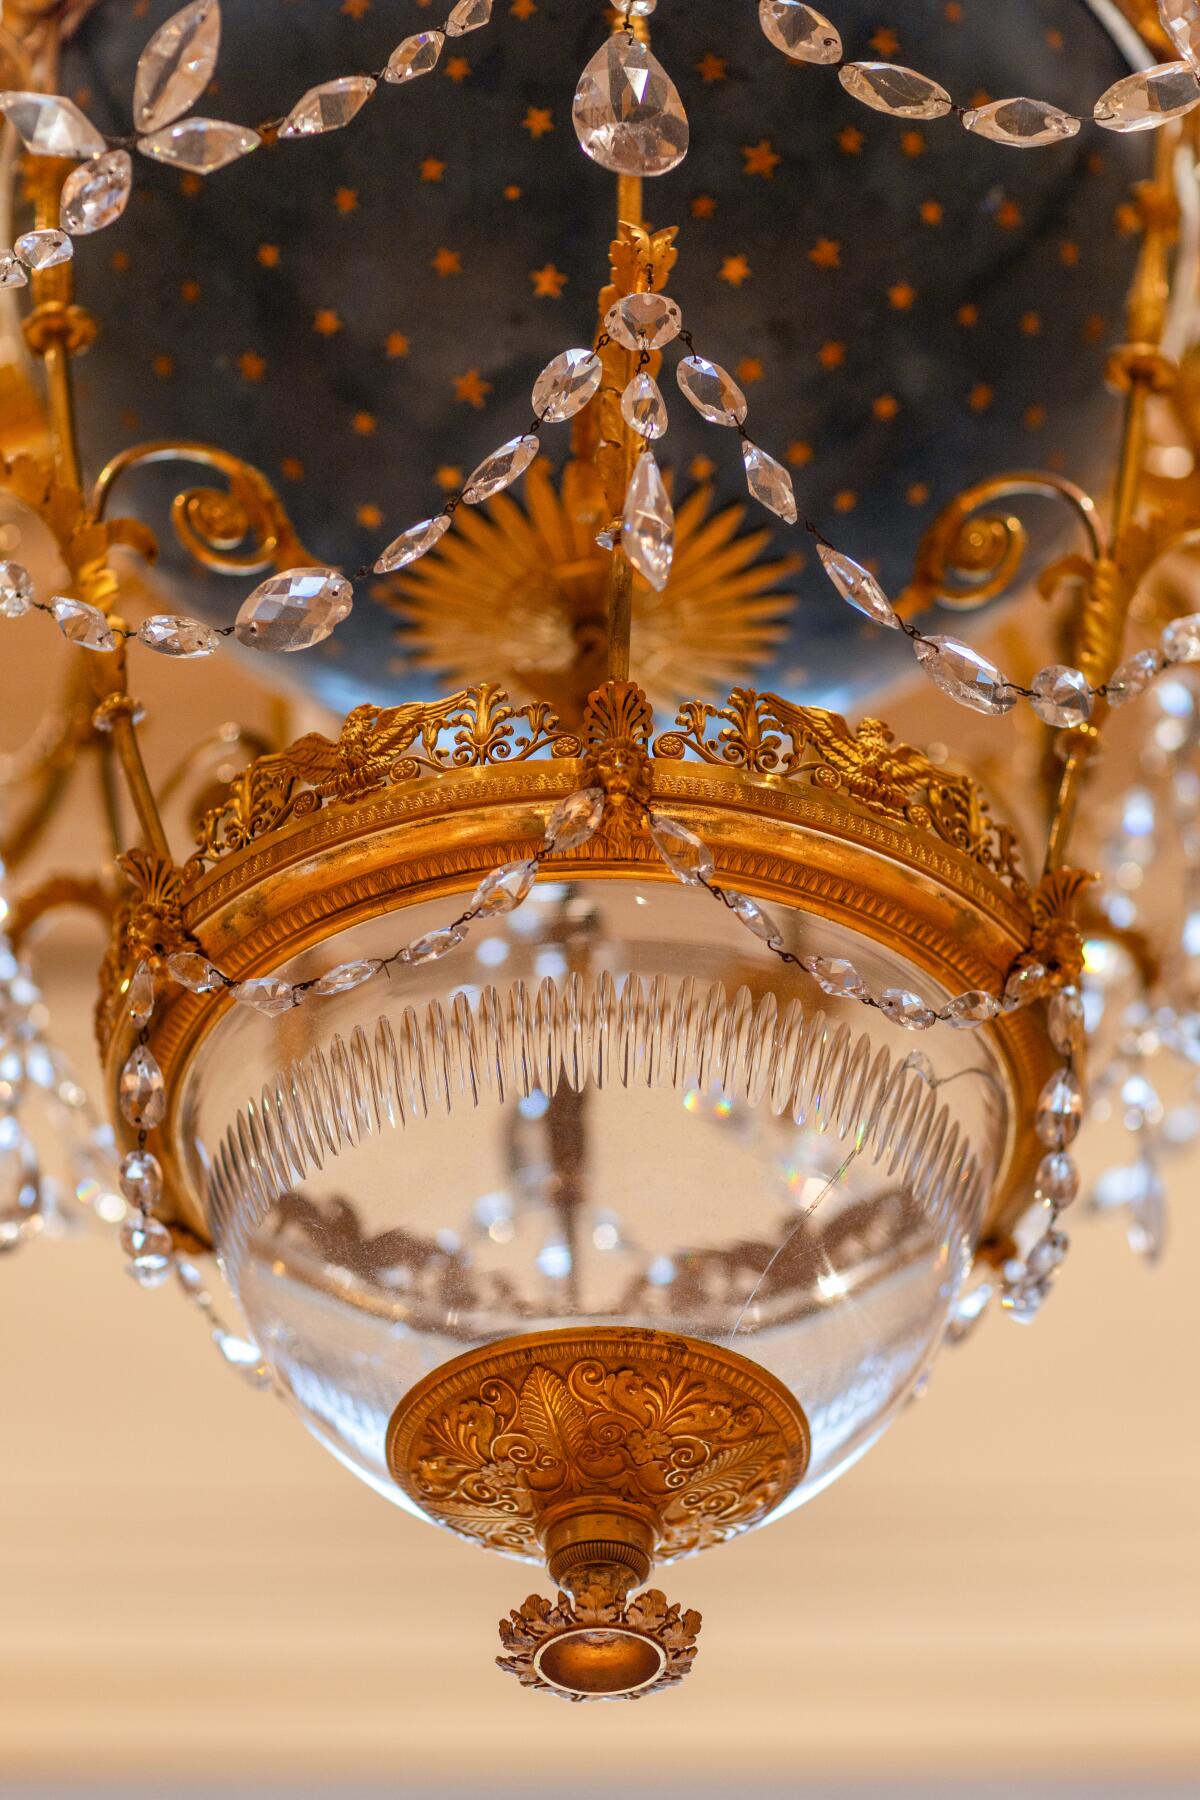 Detail of the cut-glass bowl in Gérard Jean Galle's chandelier.